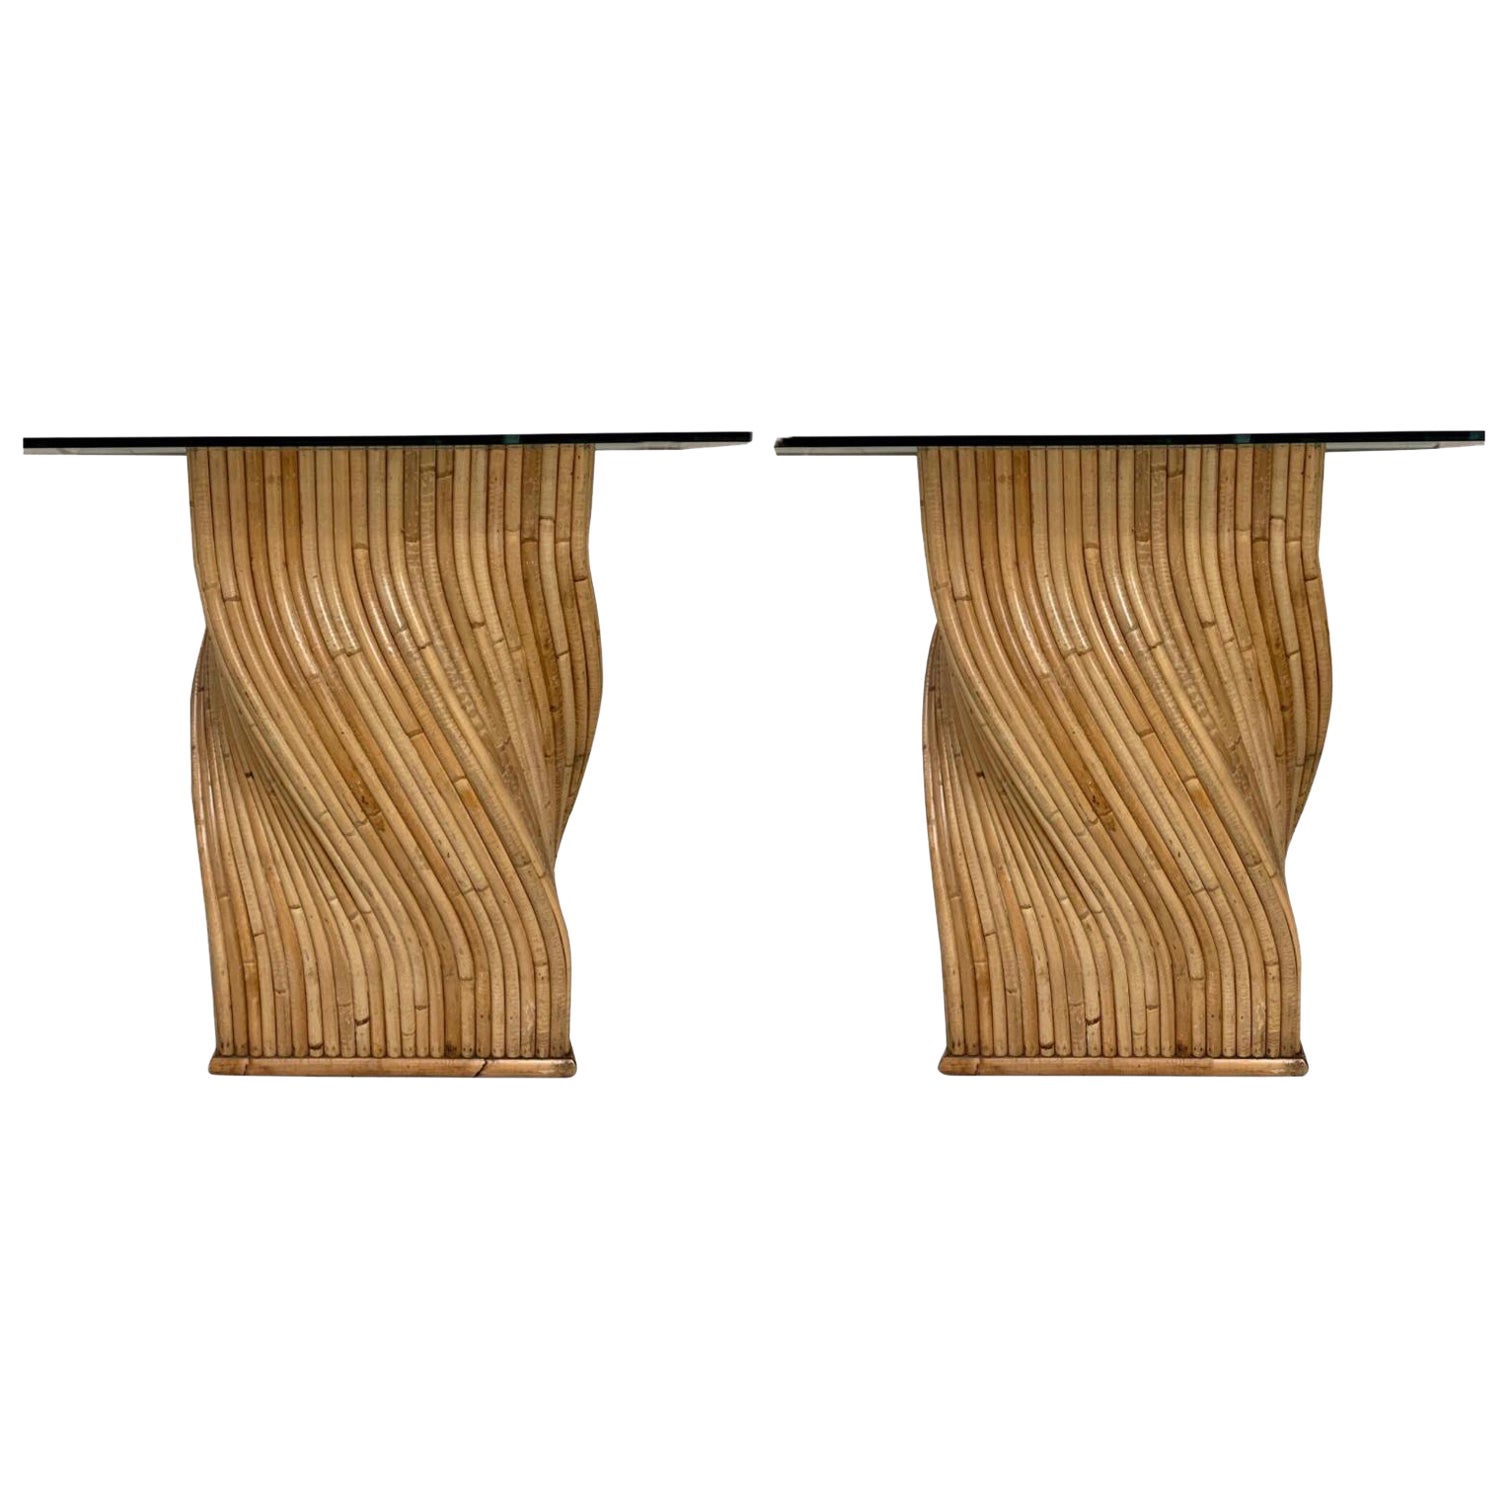 Organic Modern Pencil Bamboo Table Bases / Pedestals / Console Tables - Pair For Sale